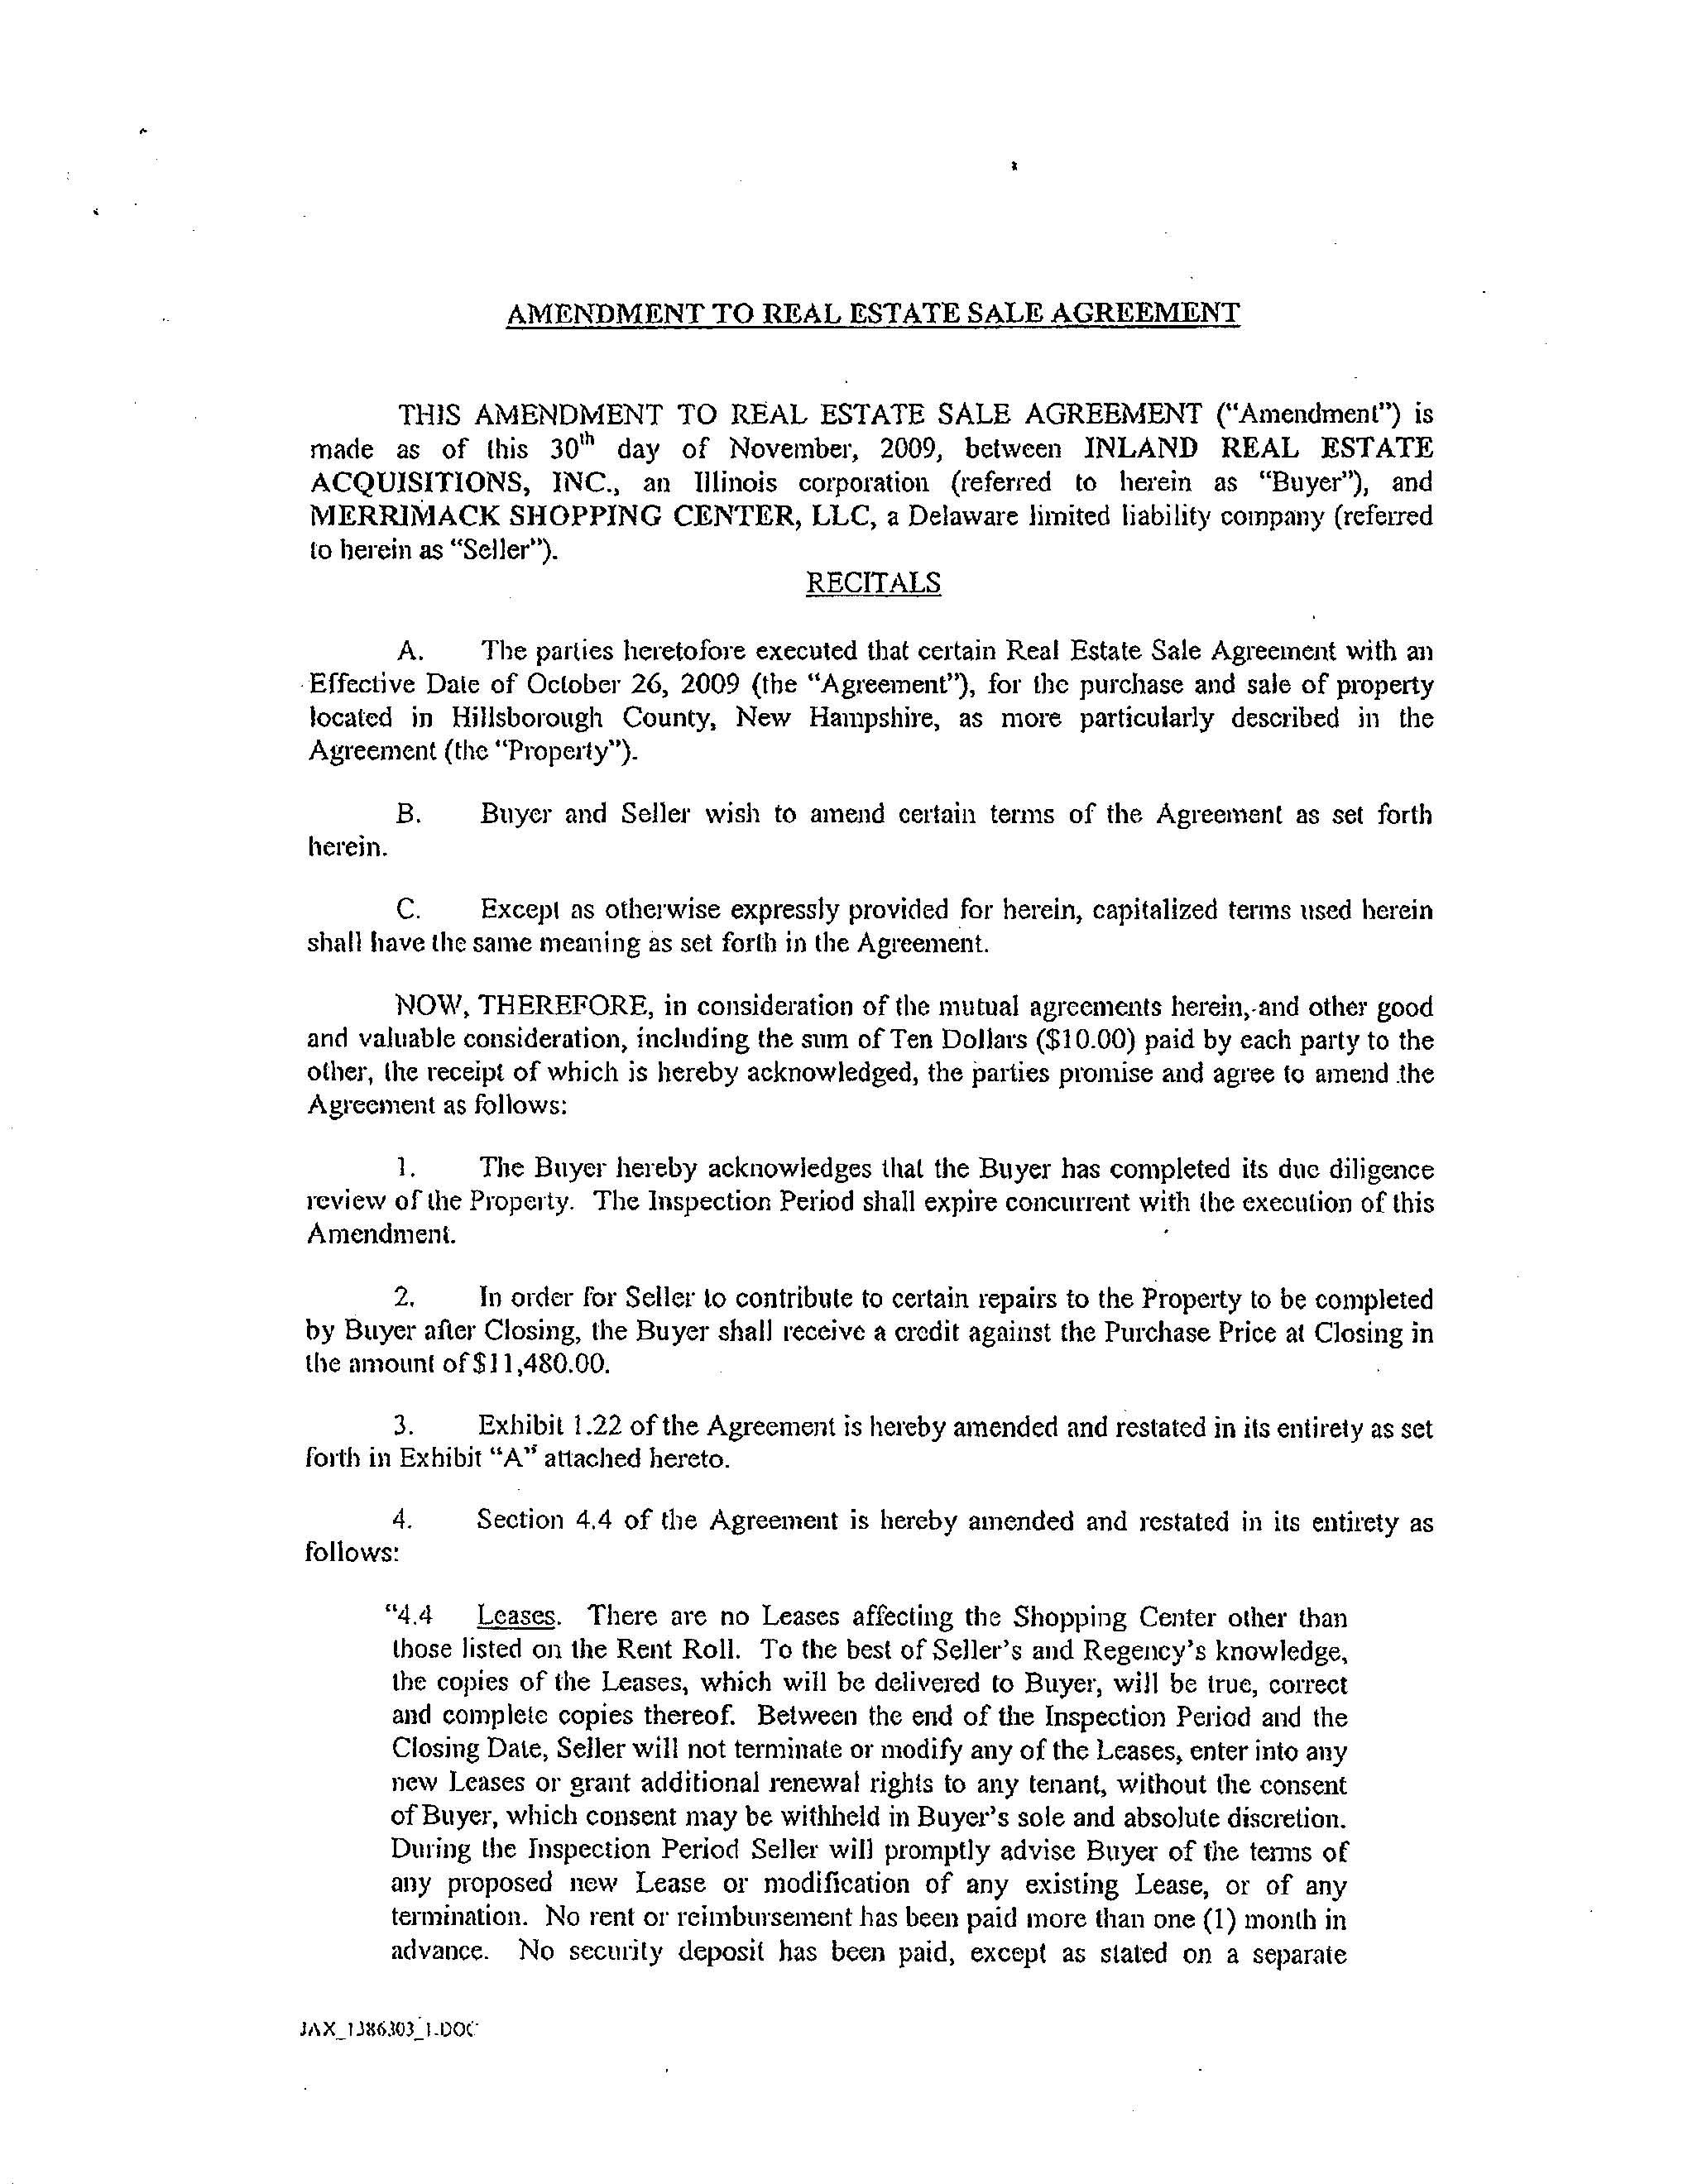 REAL ESTATE SALE AGREEMENT In raw material purchase agreement template